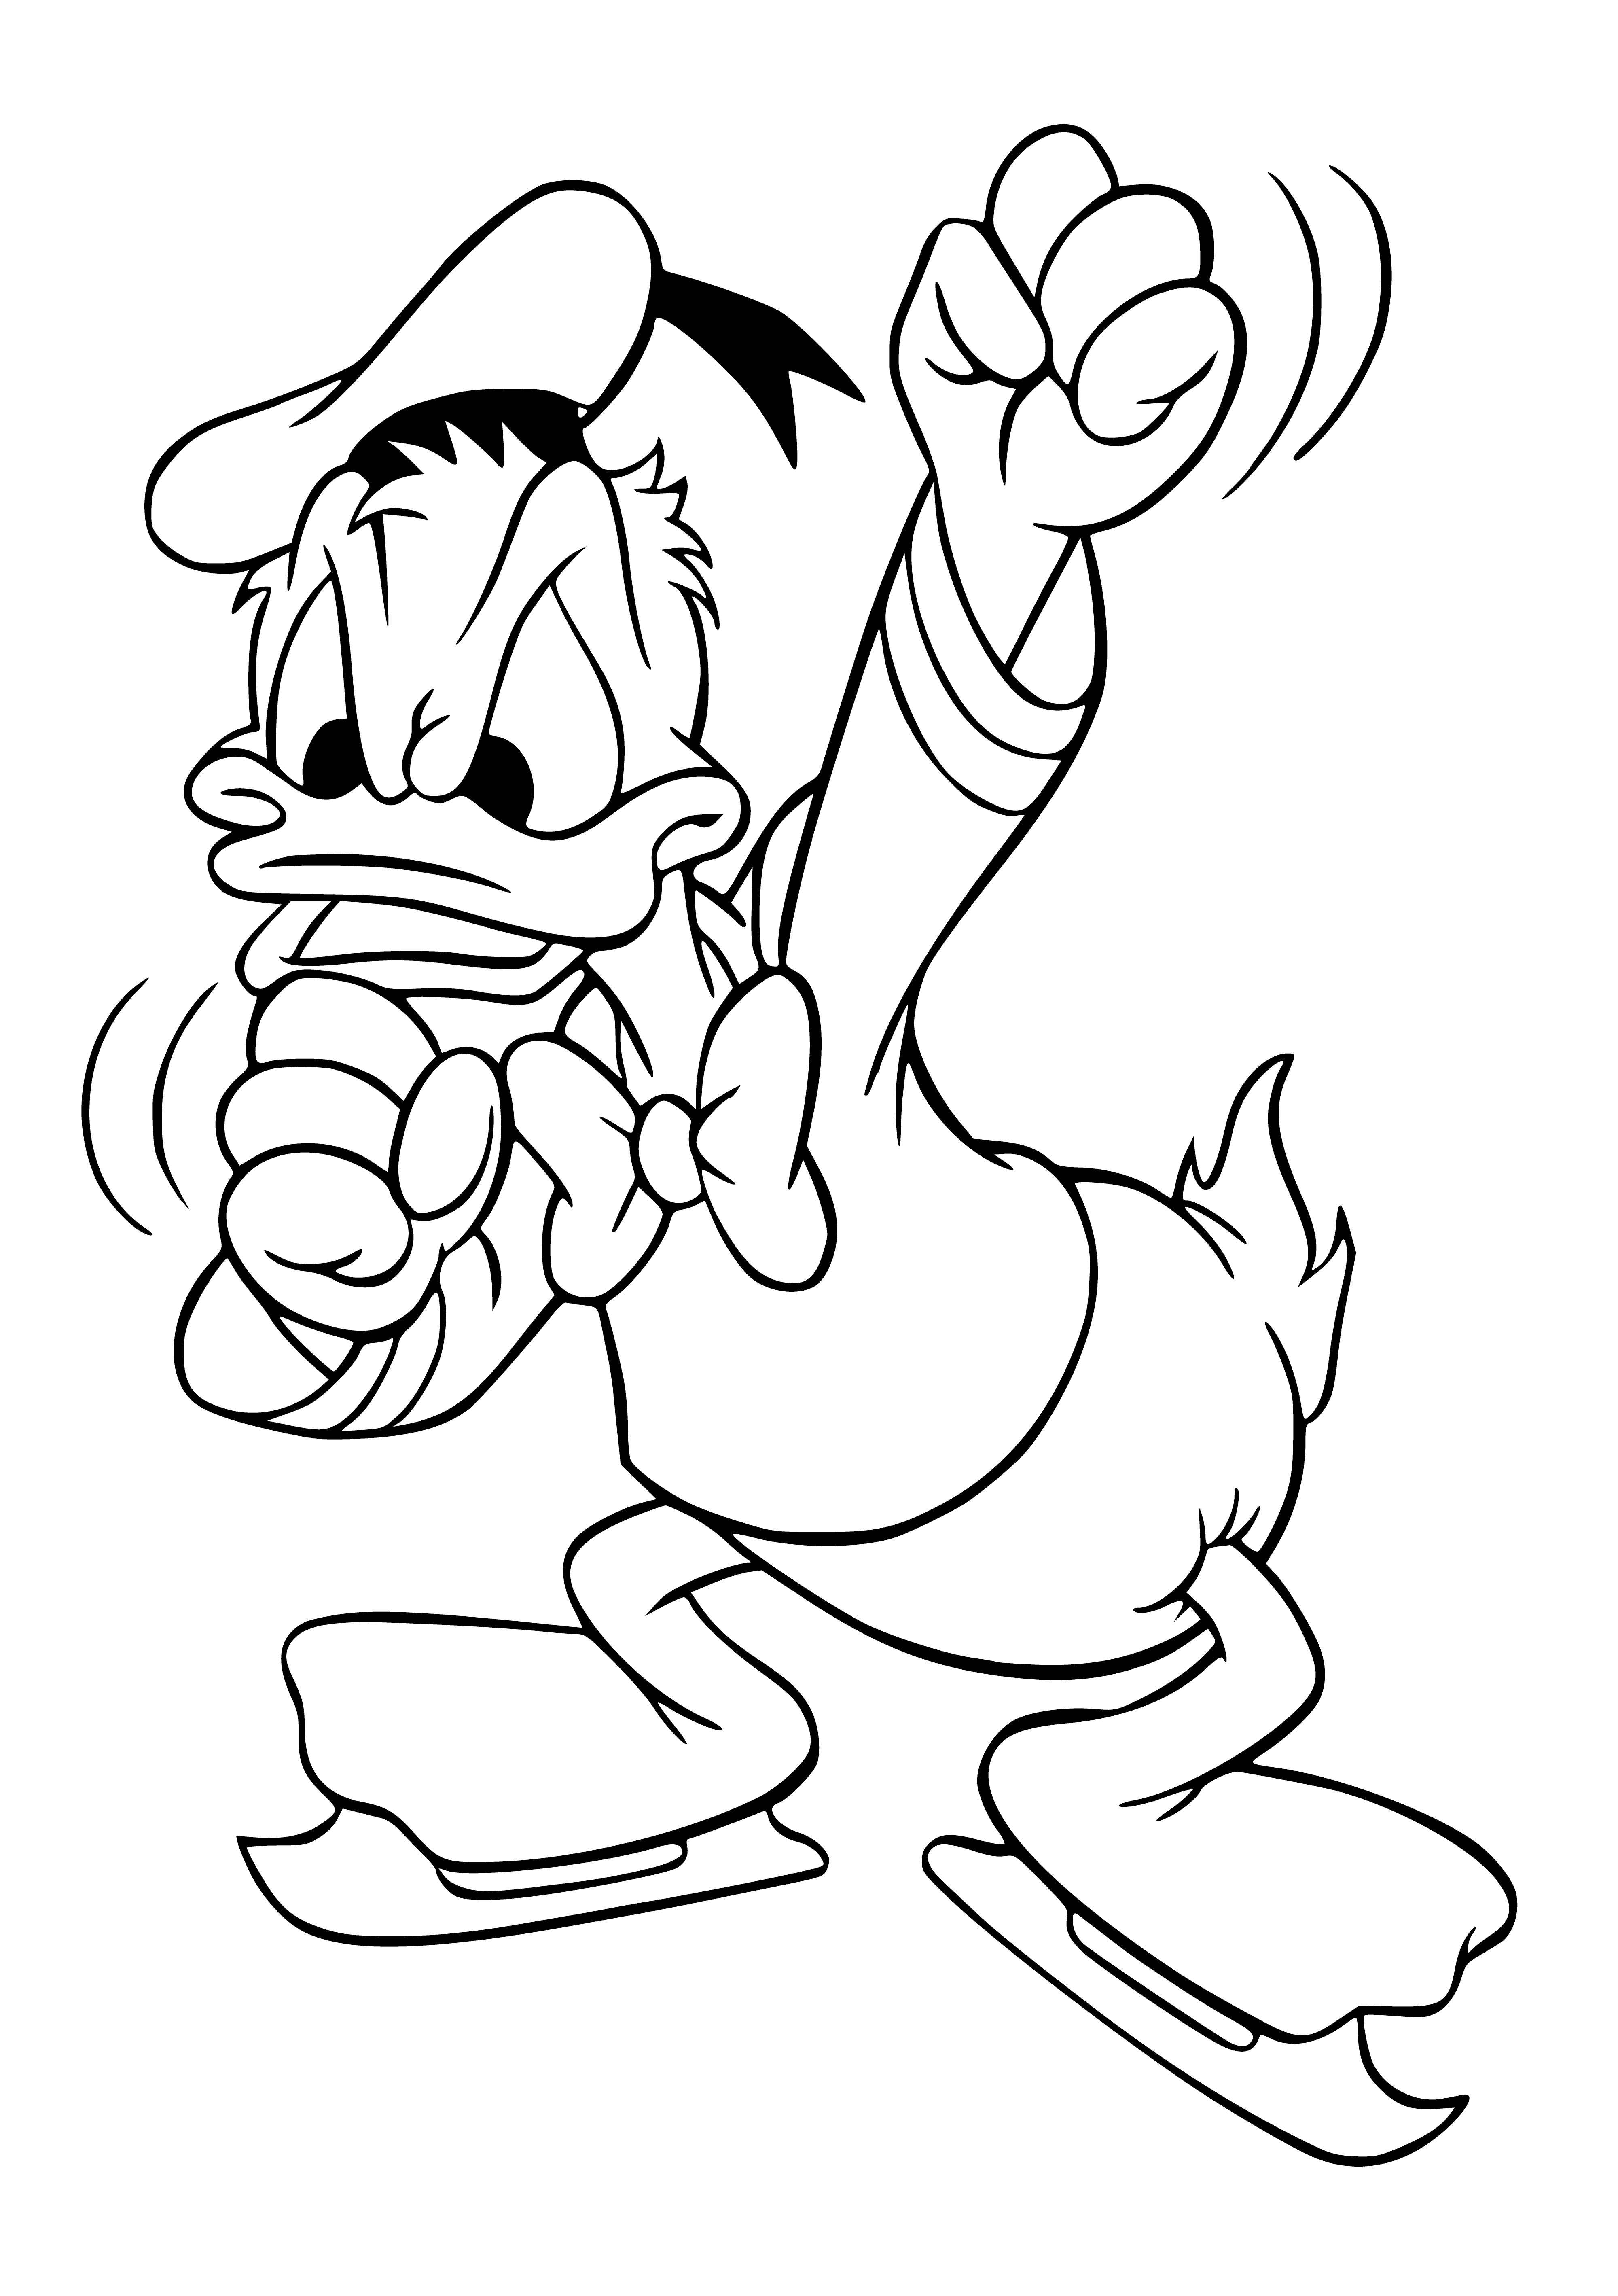 coloring page: Mickey & Minnie skating away in the center of the rink, Donald grumpy & Goofy skating backwards behind them as other skaters enjoy! Sky beautiful blue, rink lined with trees.